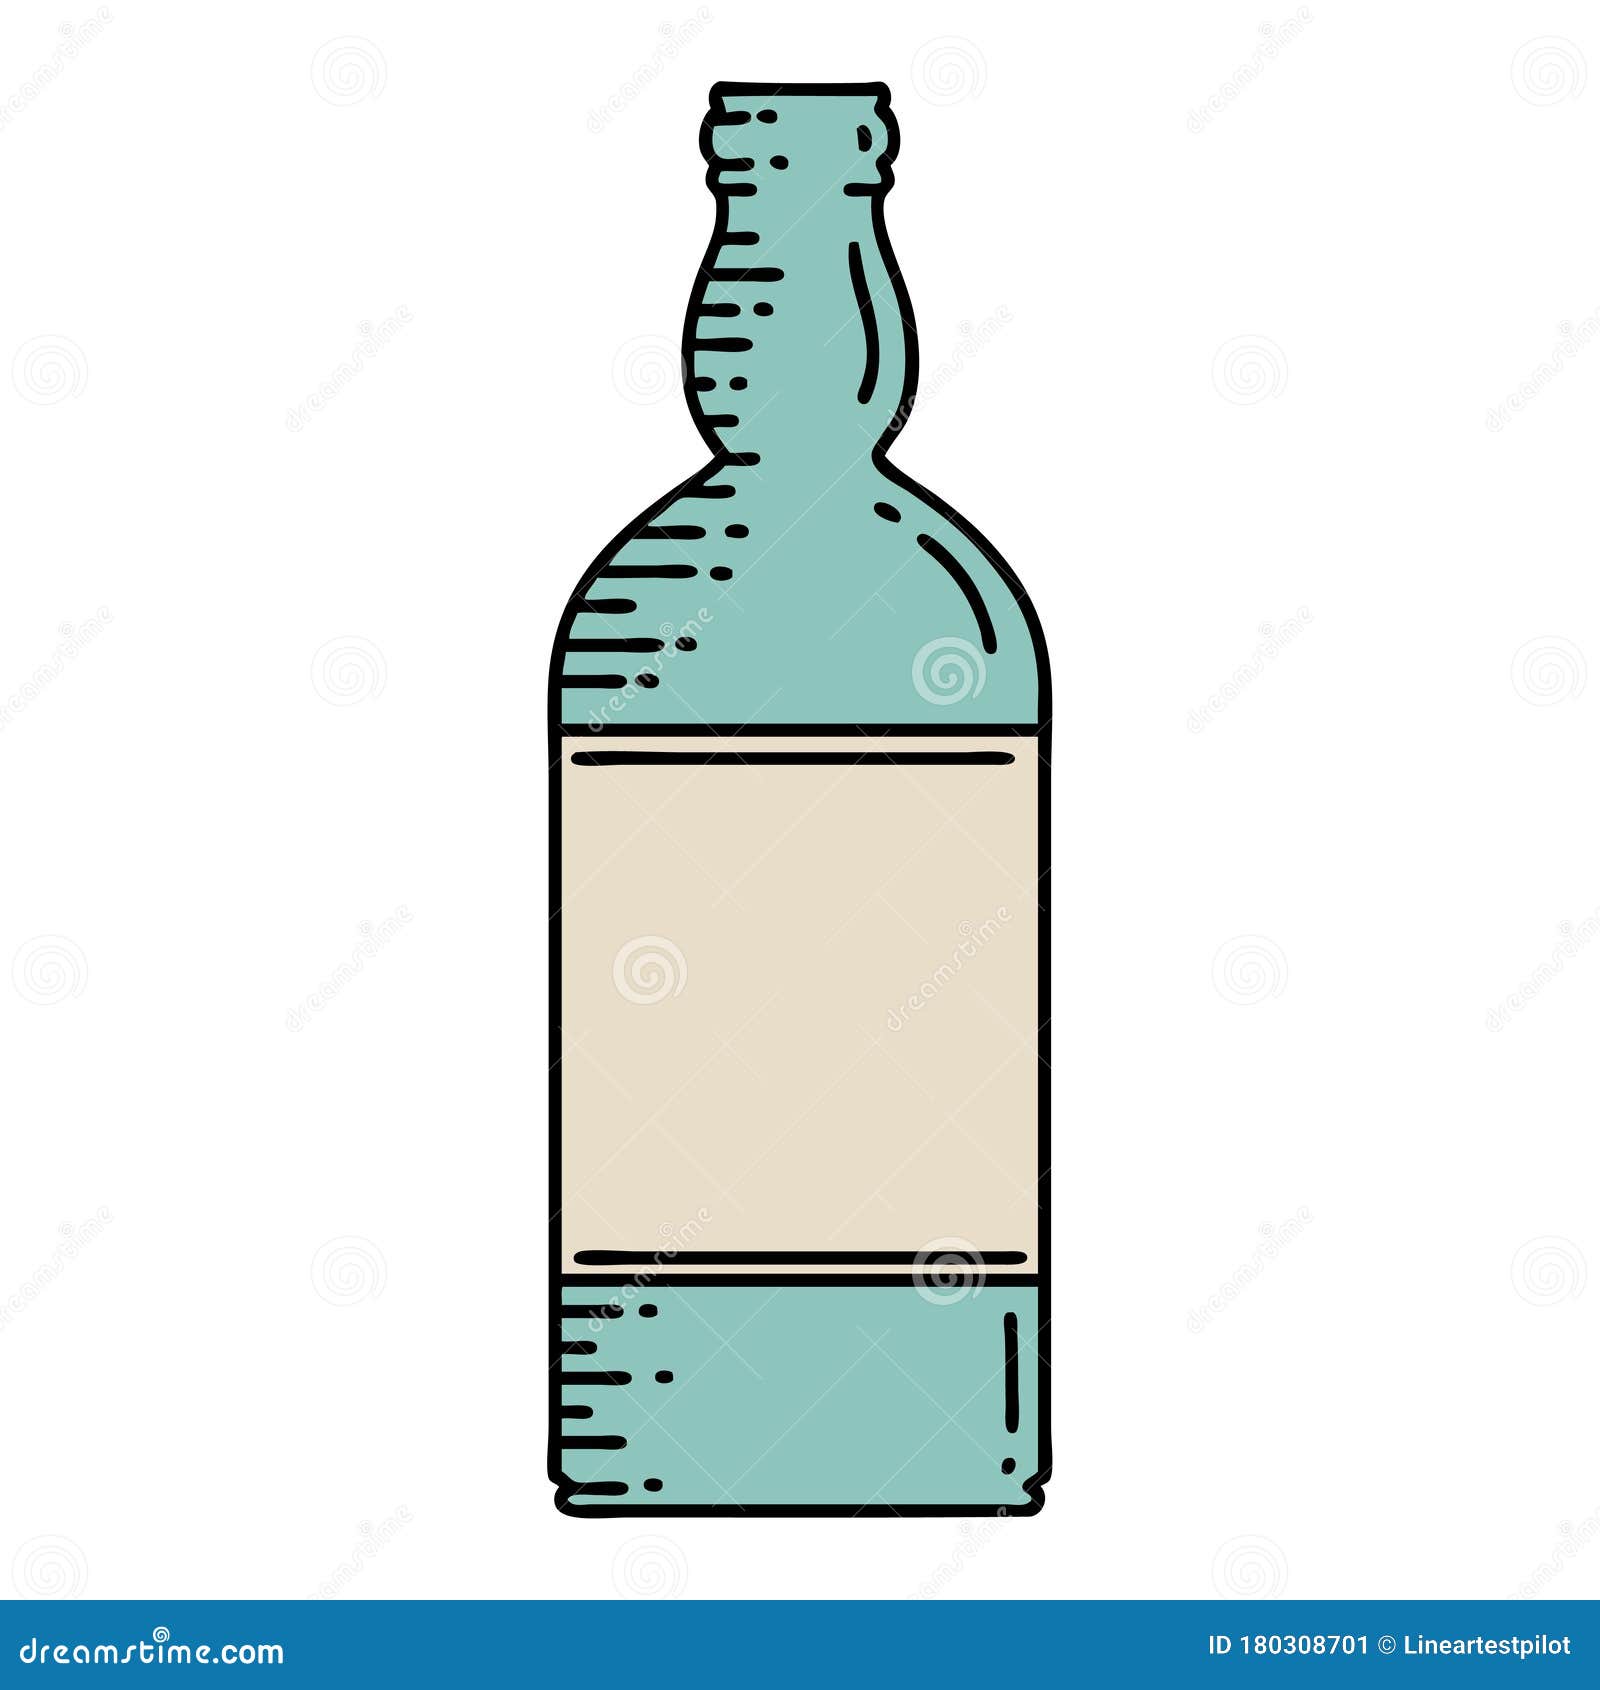 Traditional Tattoo of a Bottle Stock Vector - Illustration of alcohol,  tattoos: 180308701